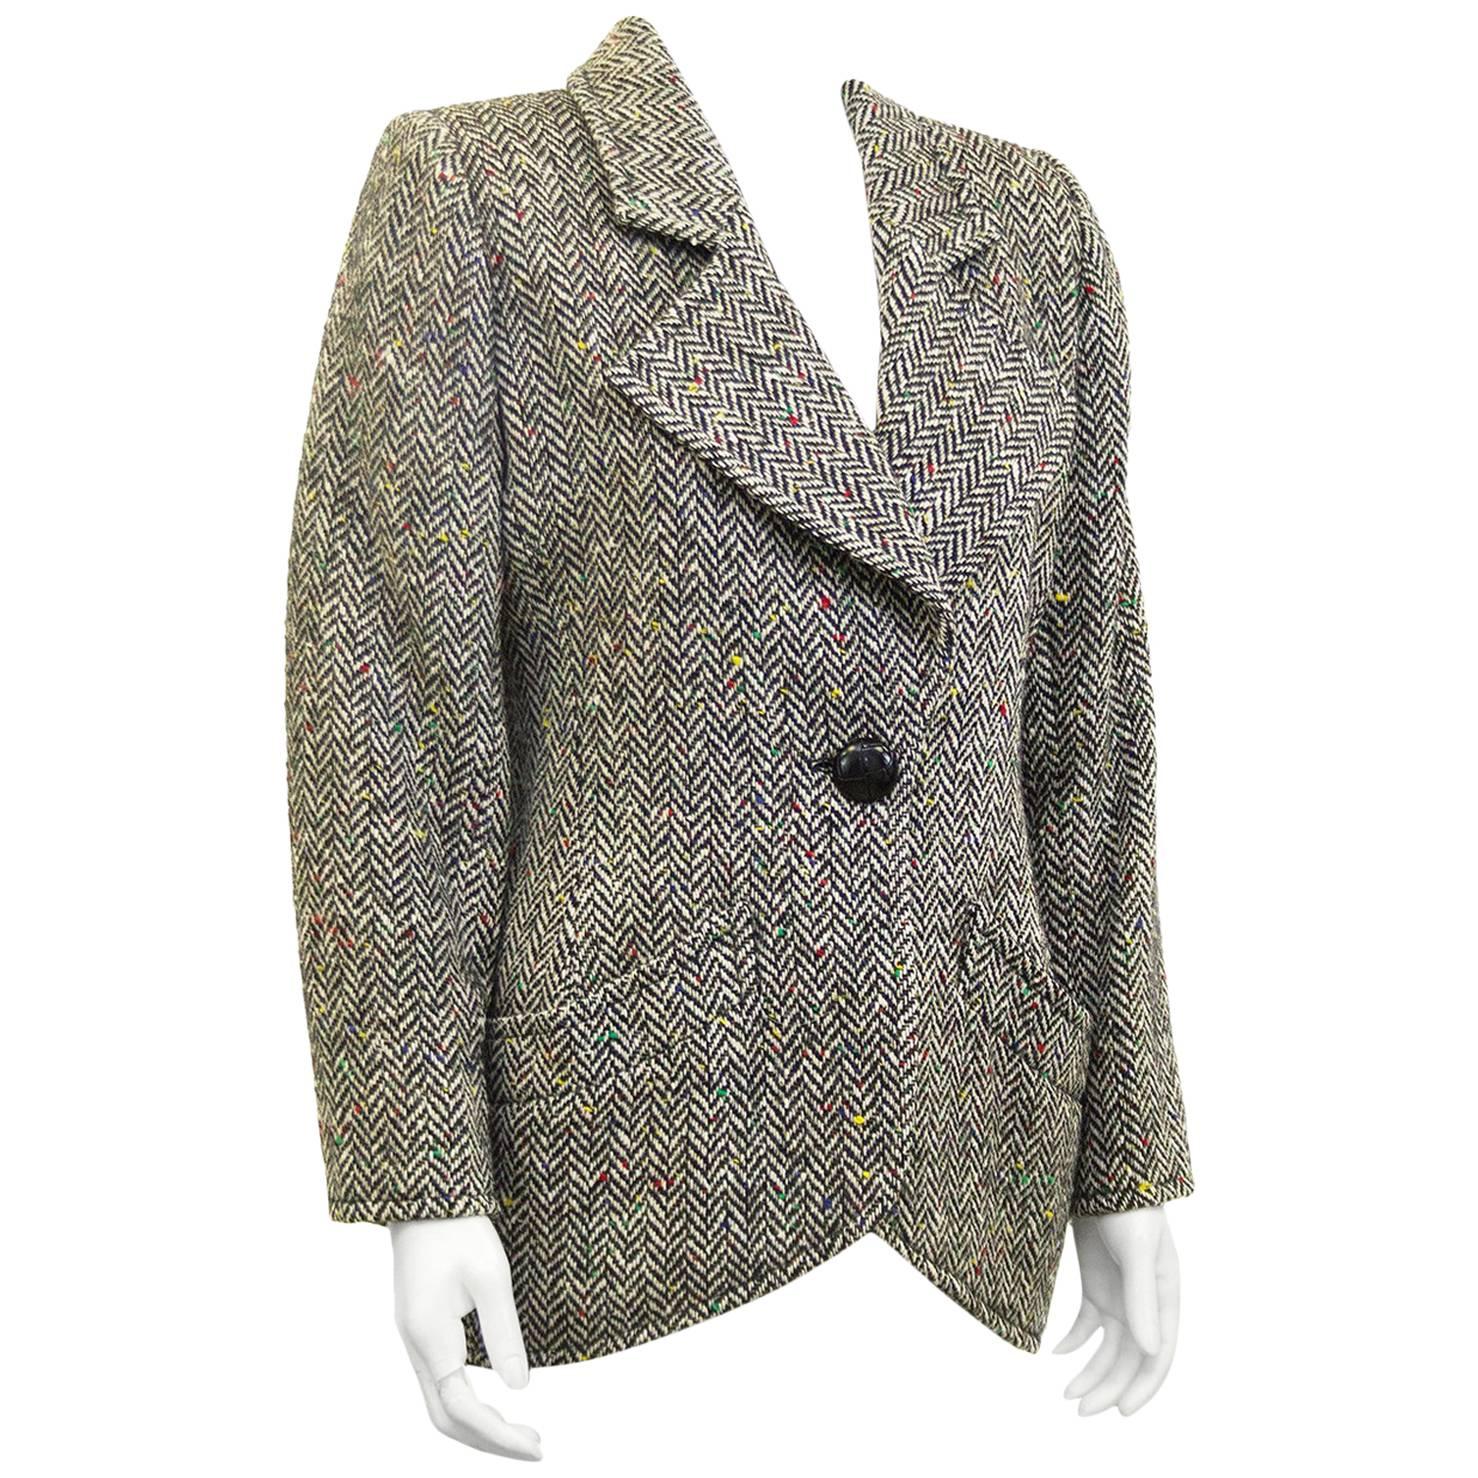 1980s Black and White Herringbone Wool Jacket with Color Specks 